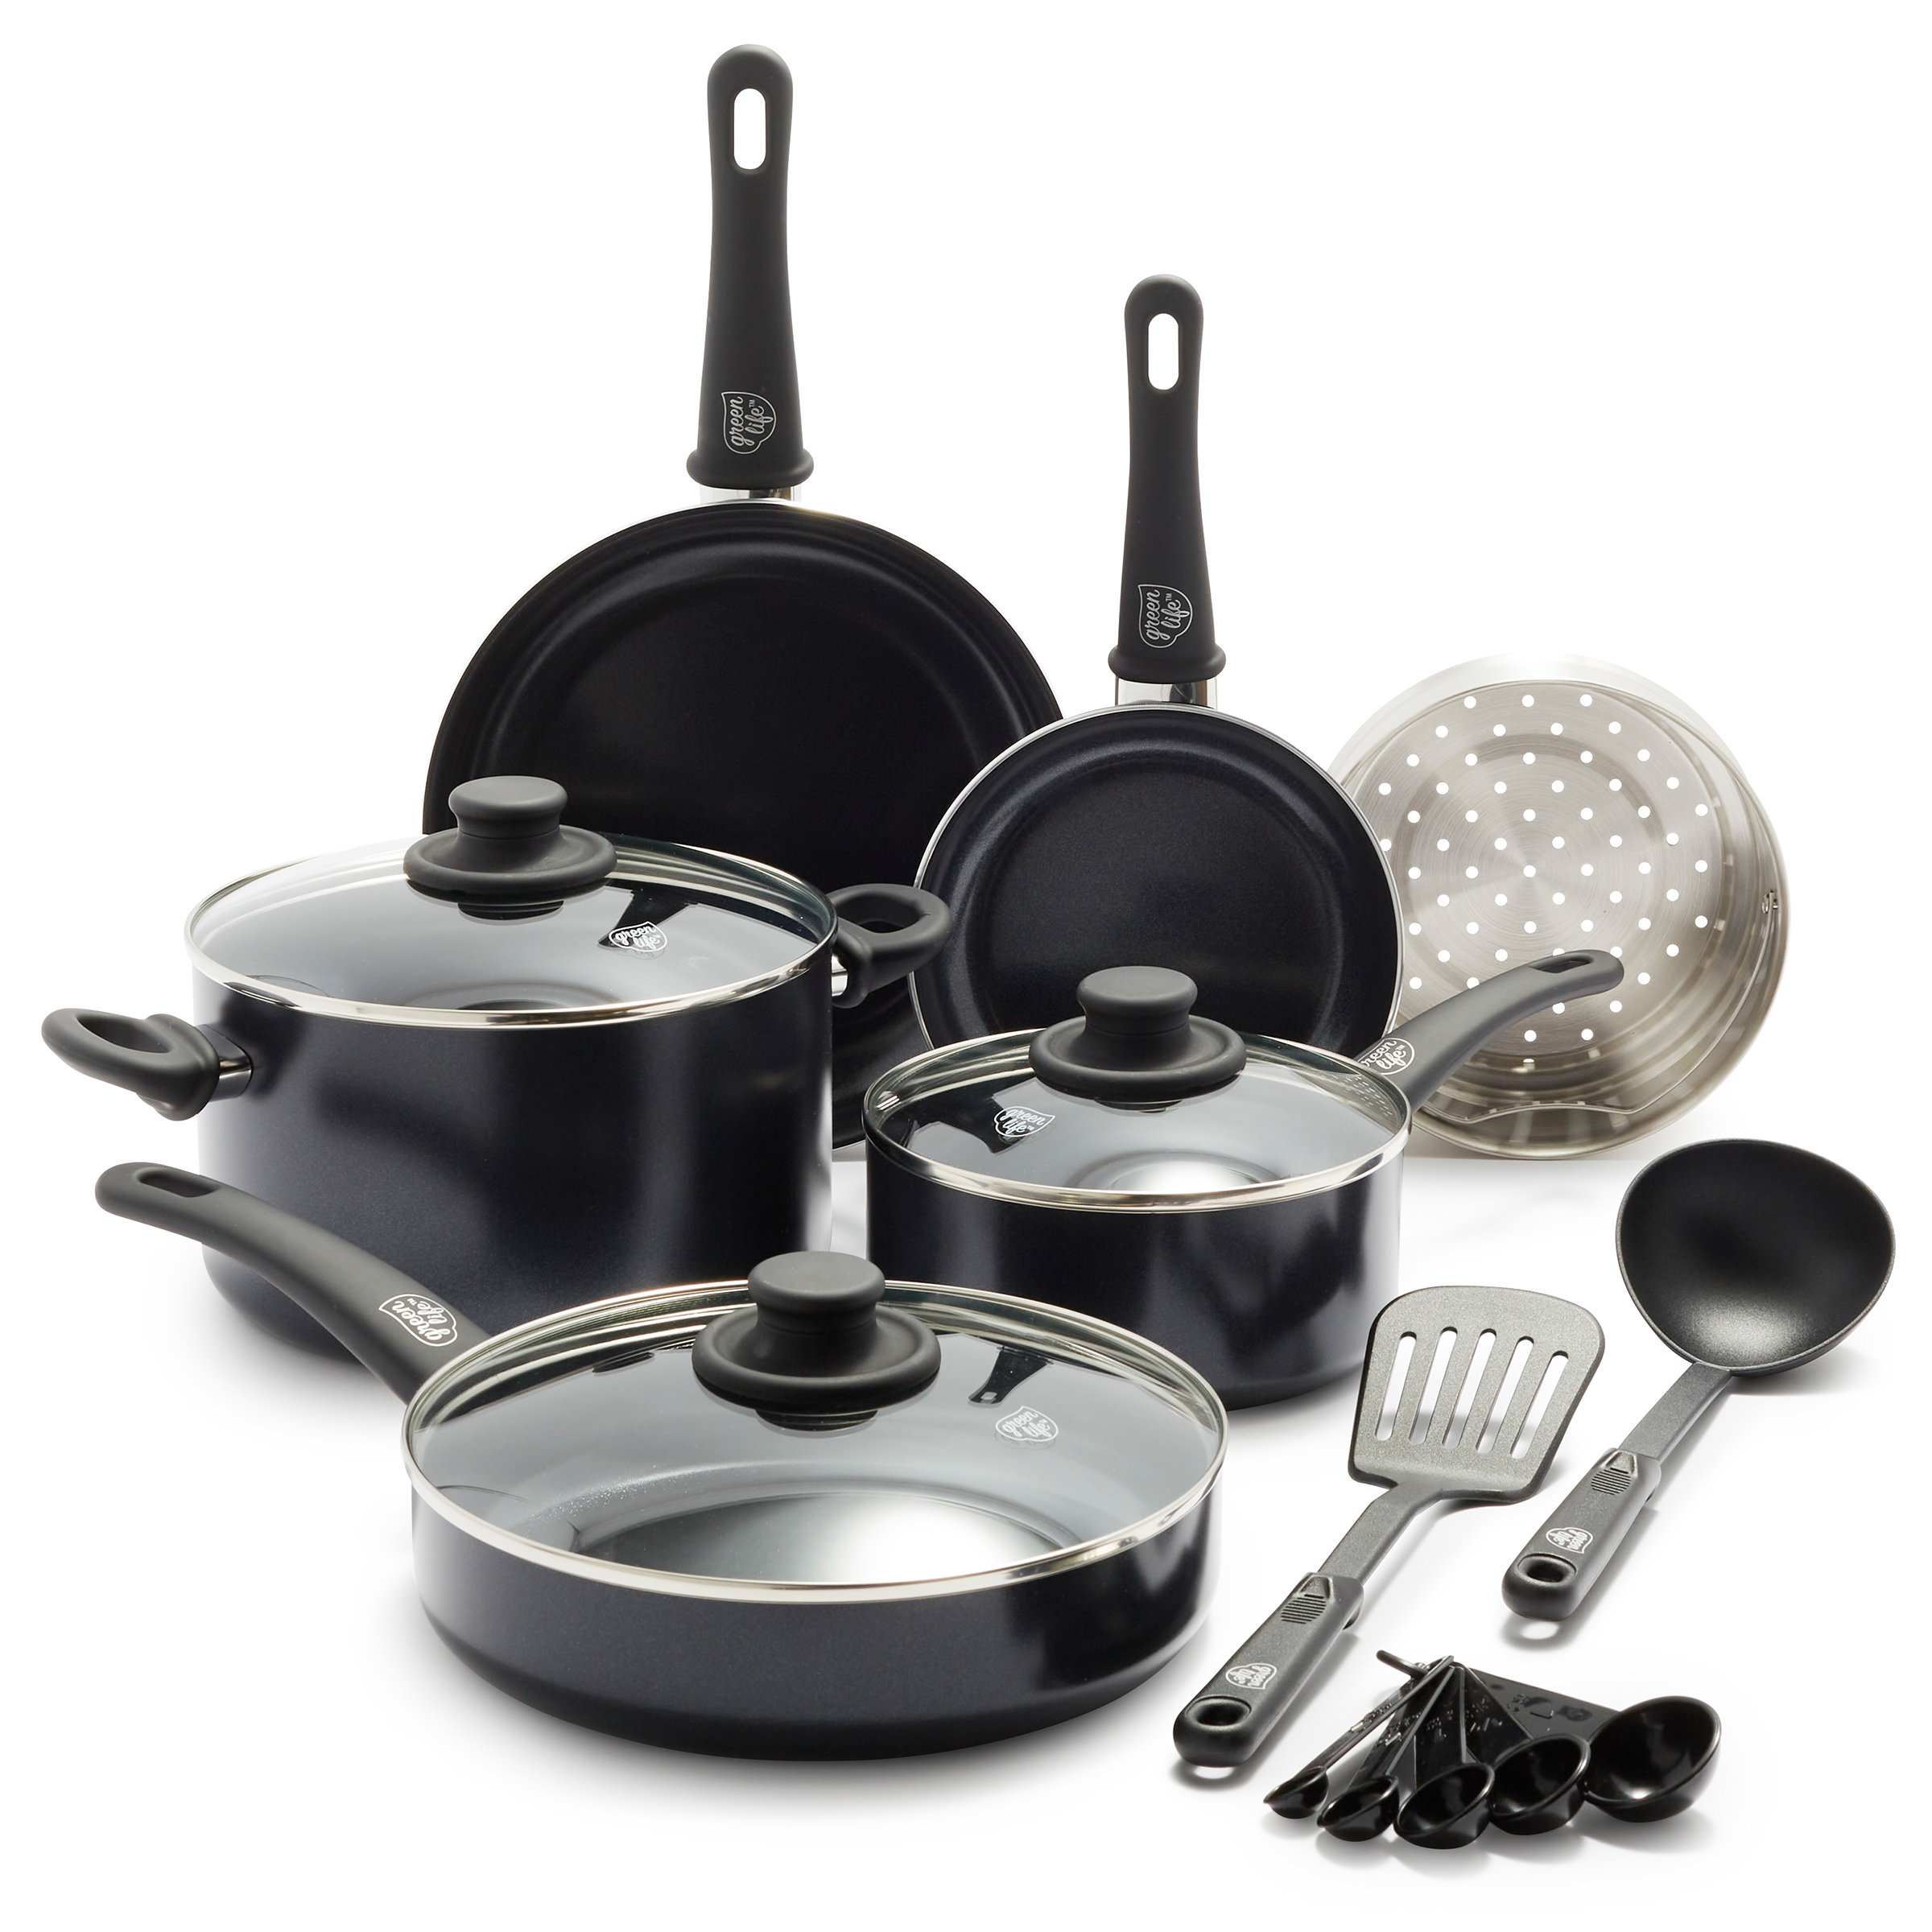 Healthy Cooking Made Easy: GreenLife Soft Grip 16-Piece Ceramic Nonstick Cookware  Set Review 